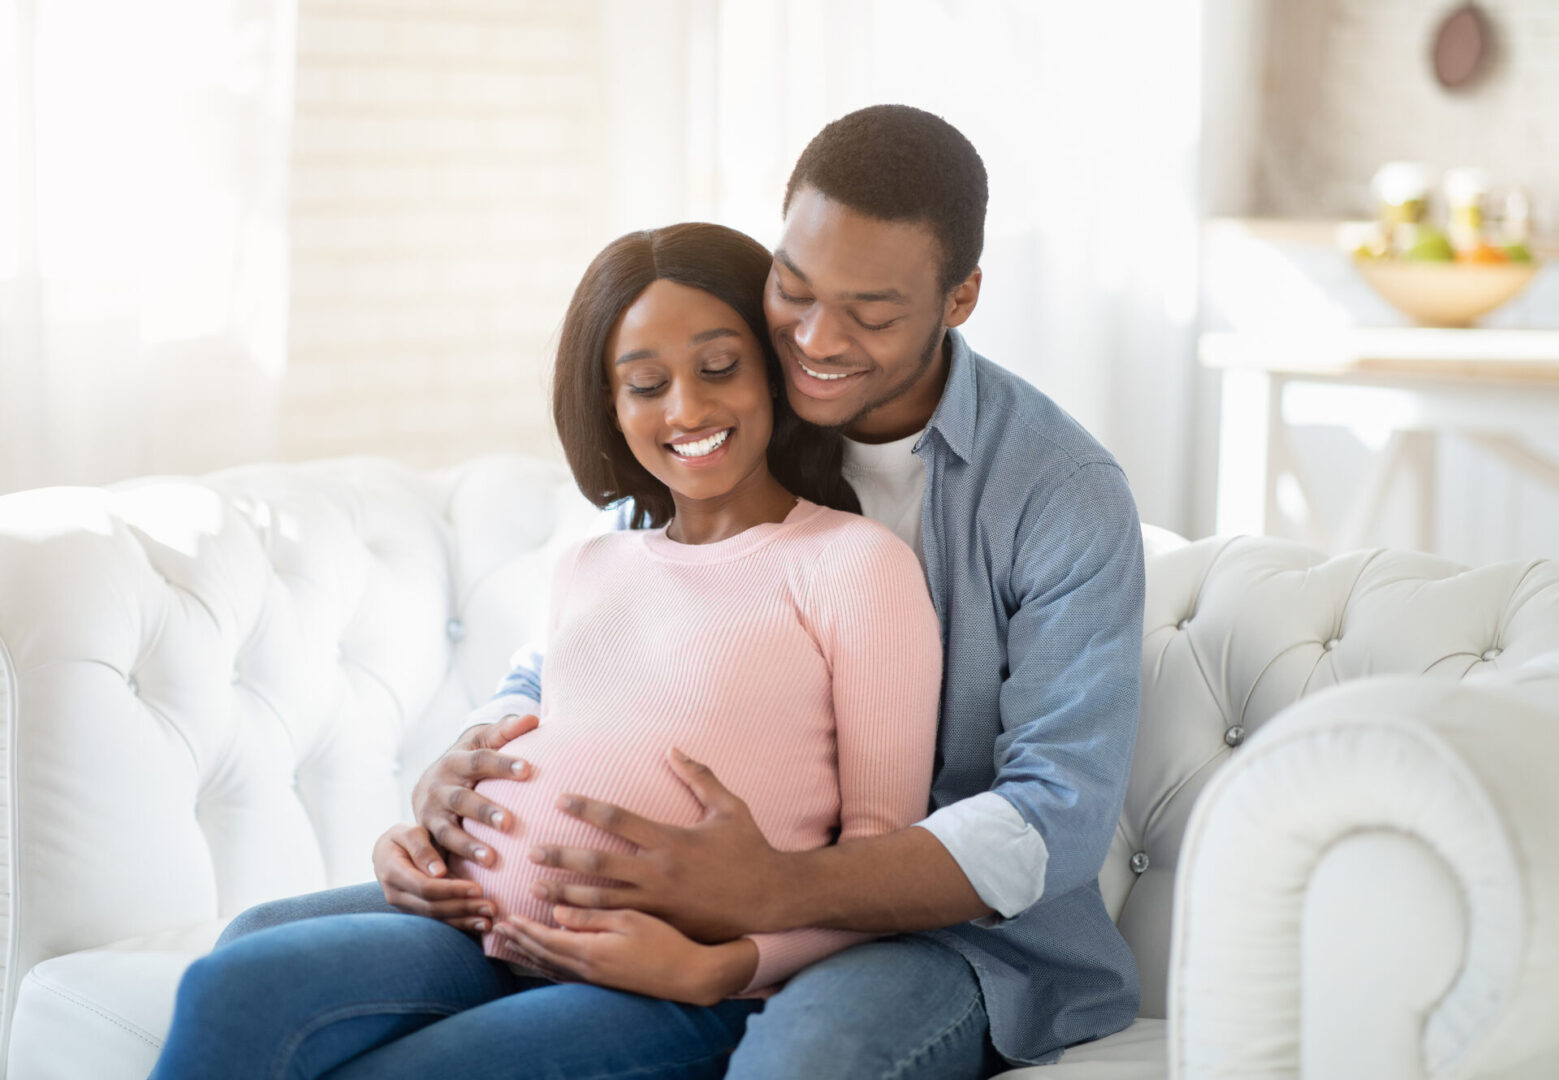 Smiling future mom and dad expecting baby, sitting on sofa at home and hugging. Beautiful pregnant couple embracing on couch. Young African American guy embracing his expectant wife